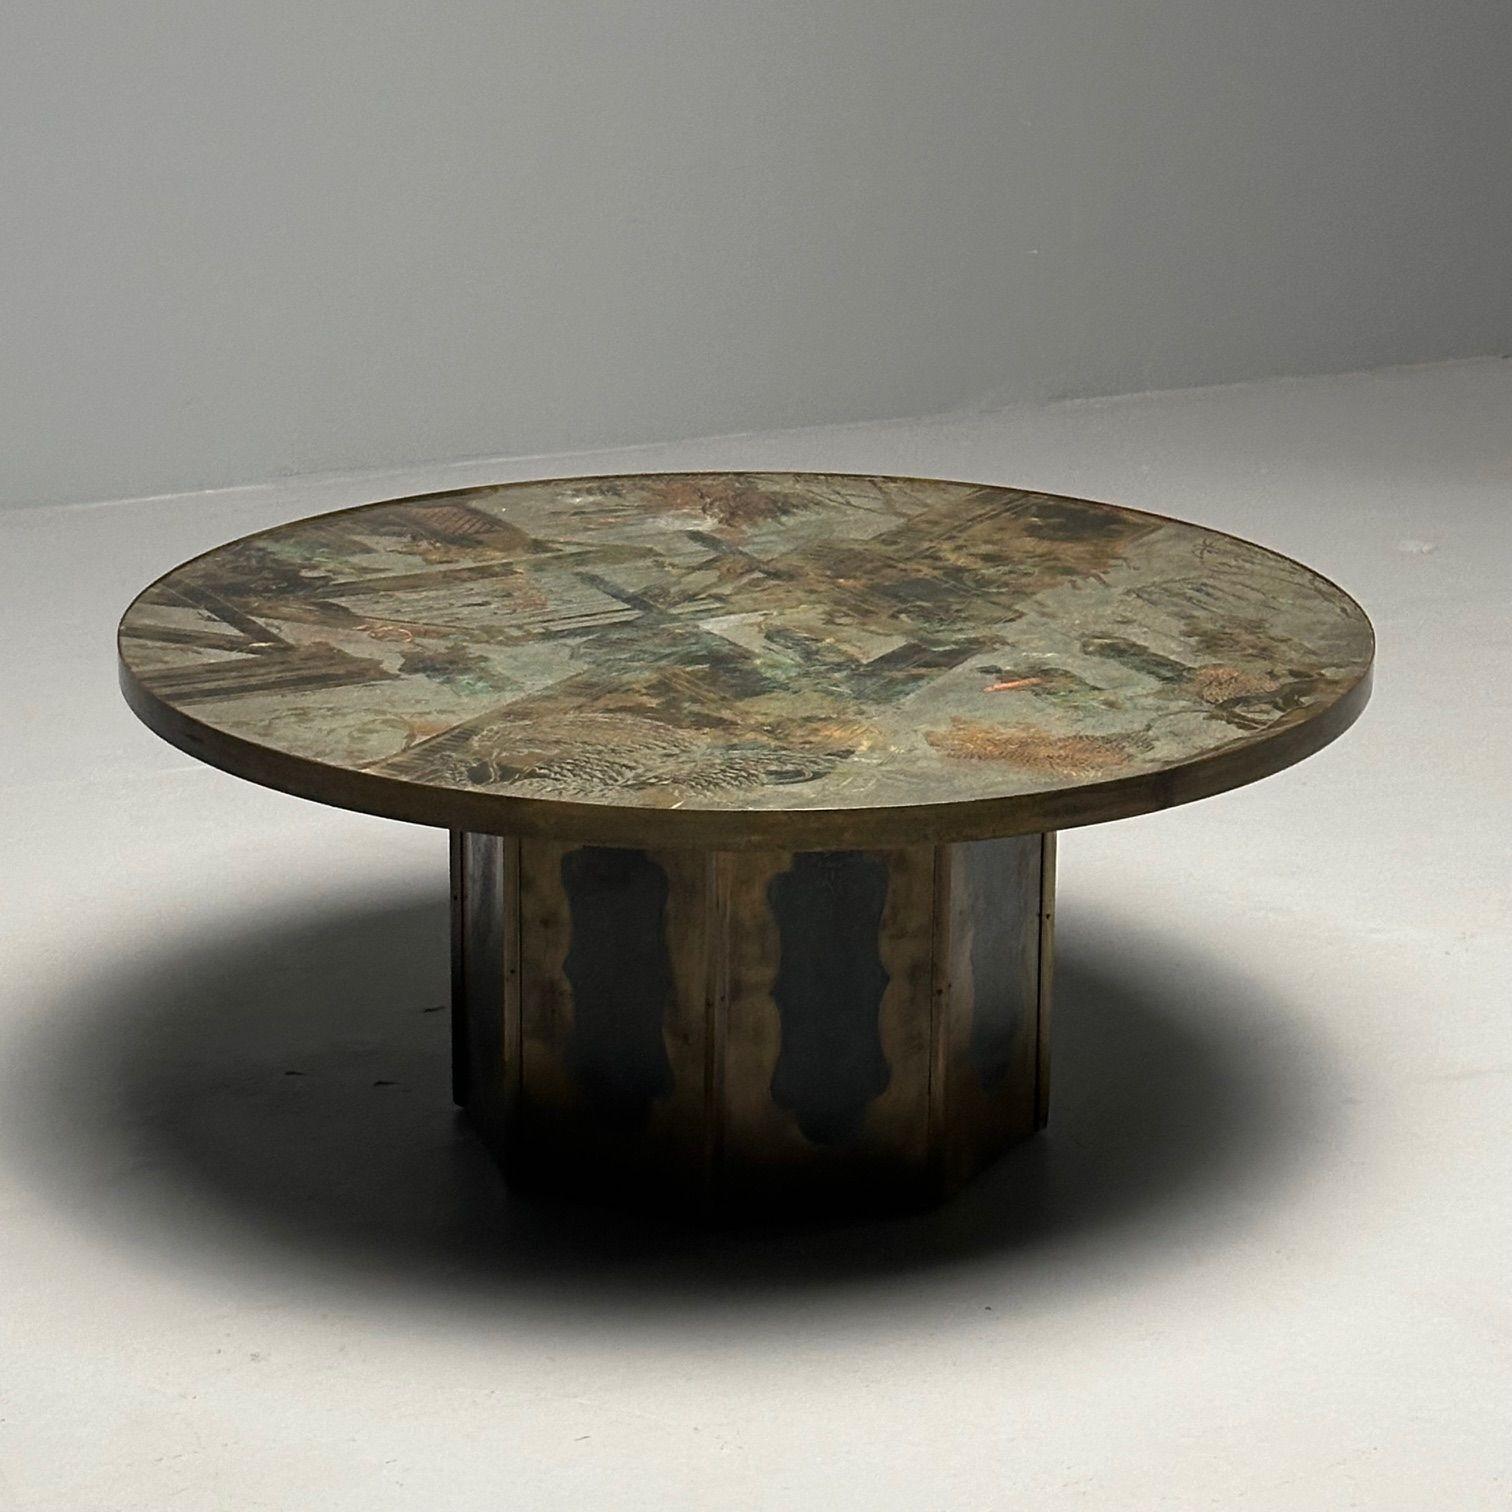 Early Mid-Century Modern Philip and Kelvin Laverne 'Chan' Coffee or Cocktail Table

Early example of an engraved and patinated bronze-clad wood 'Chan' coffee table by Philip and Kelvin Laverne. Work by the father son design duo has been steadily